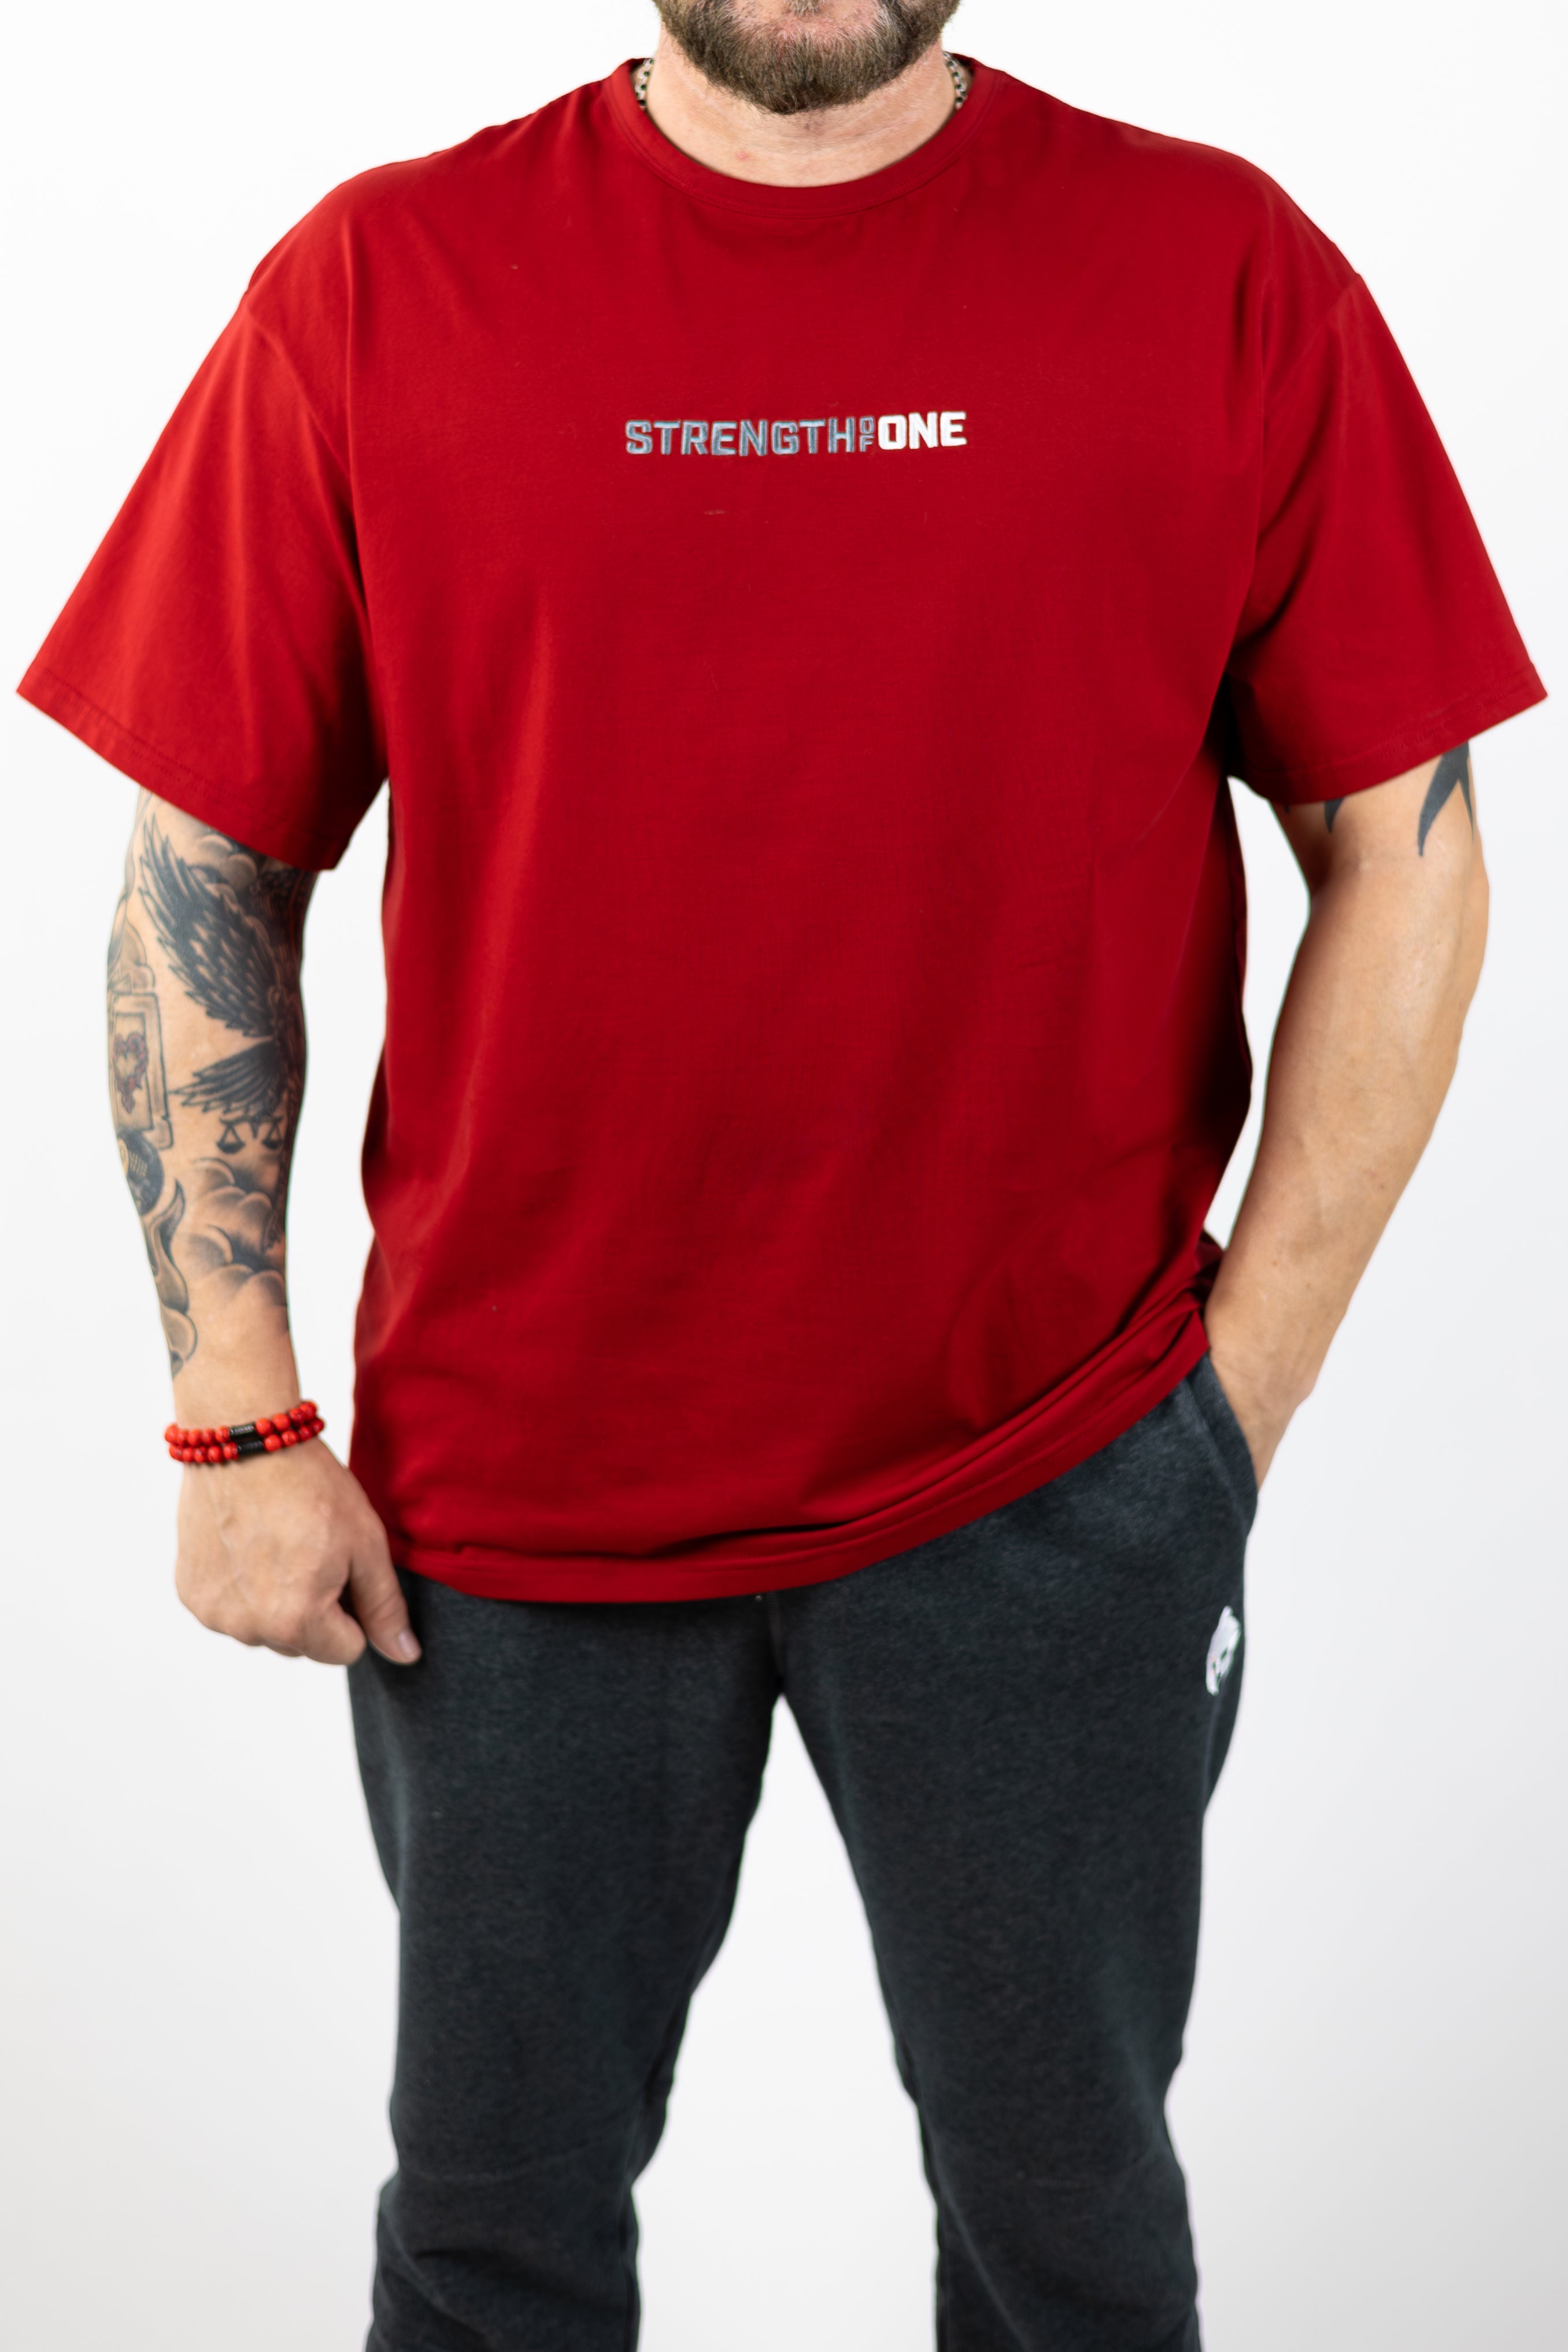 man modeling red Strength of One workout shirt with an embroidered logo reading Strength of One on the front chest